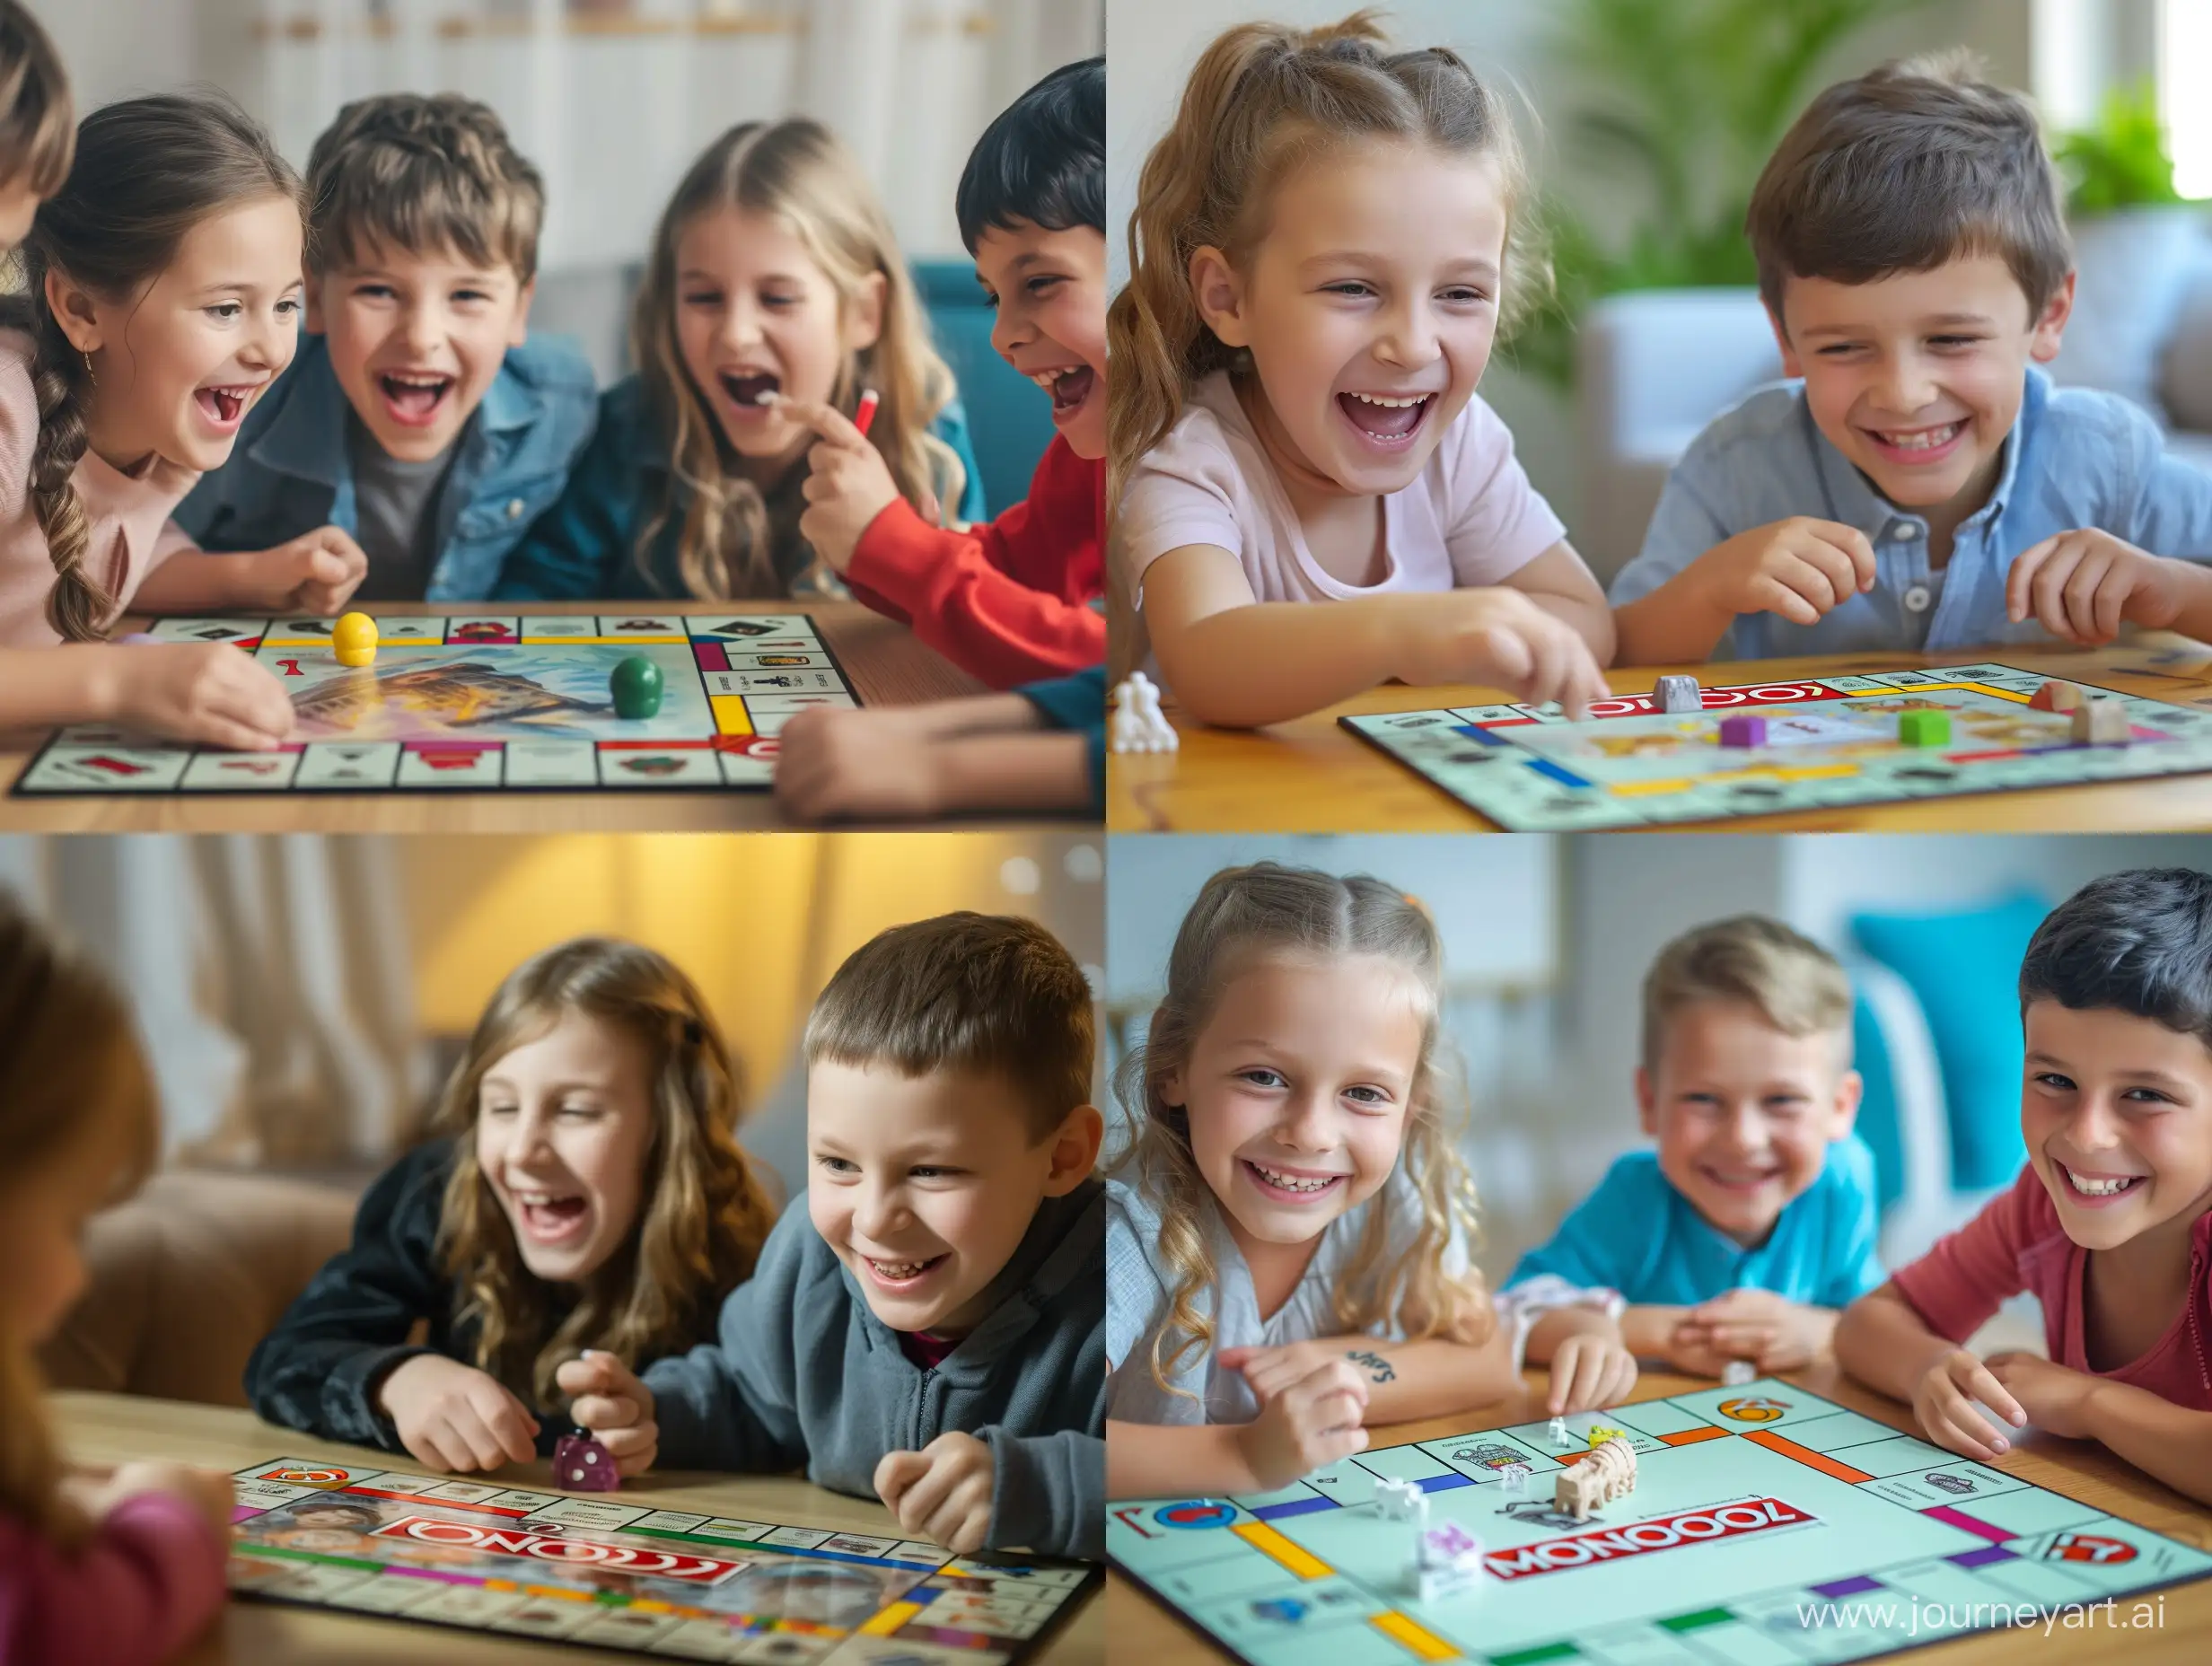 Cheerful-Kids-Engaged-in-Magical-Monopoly-Board-Game-Fun